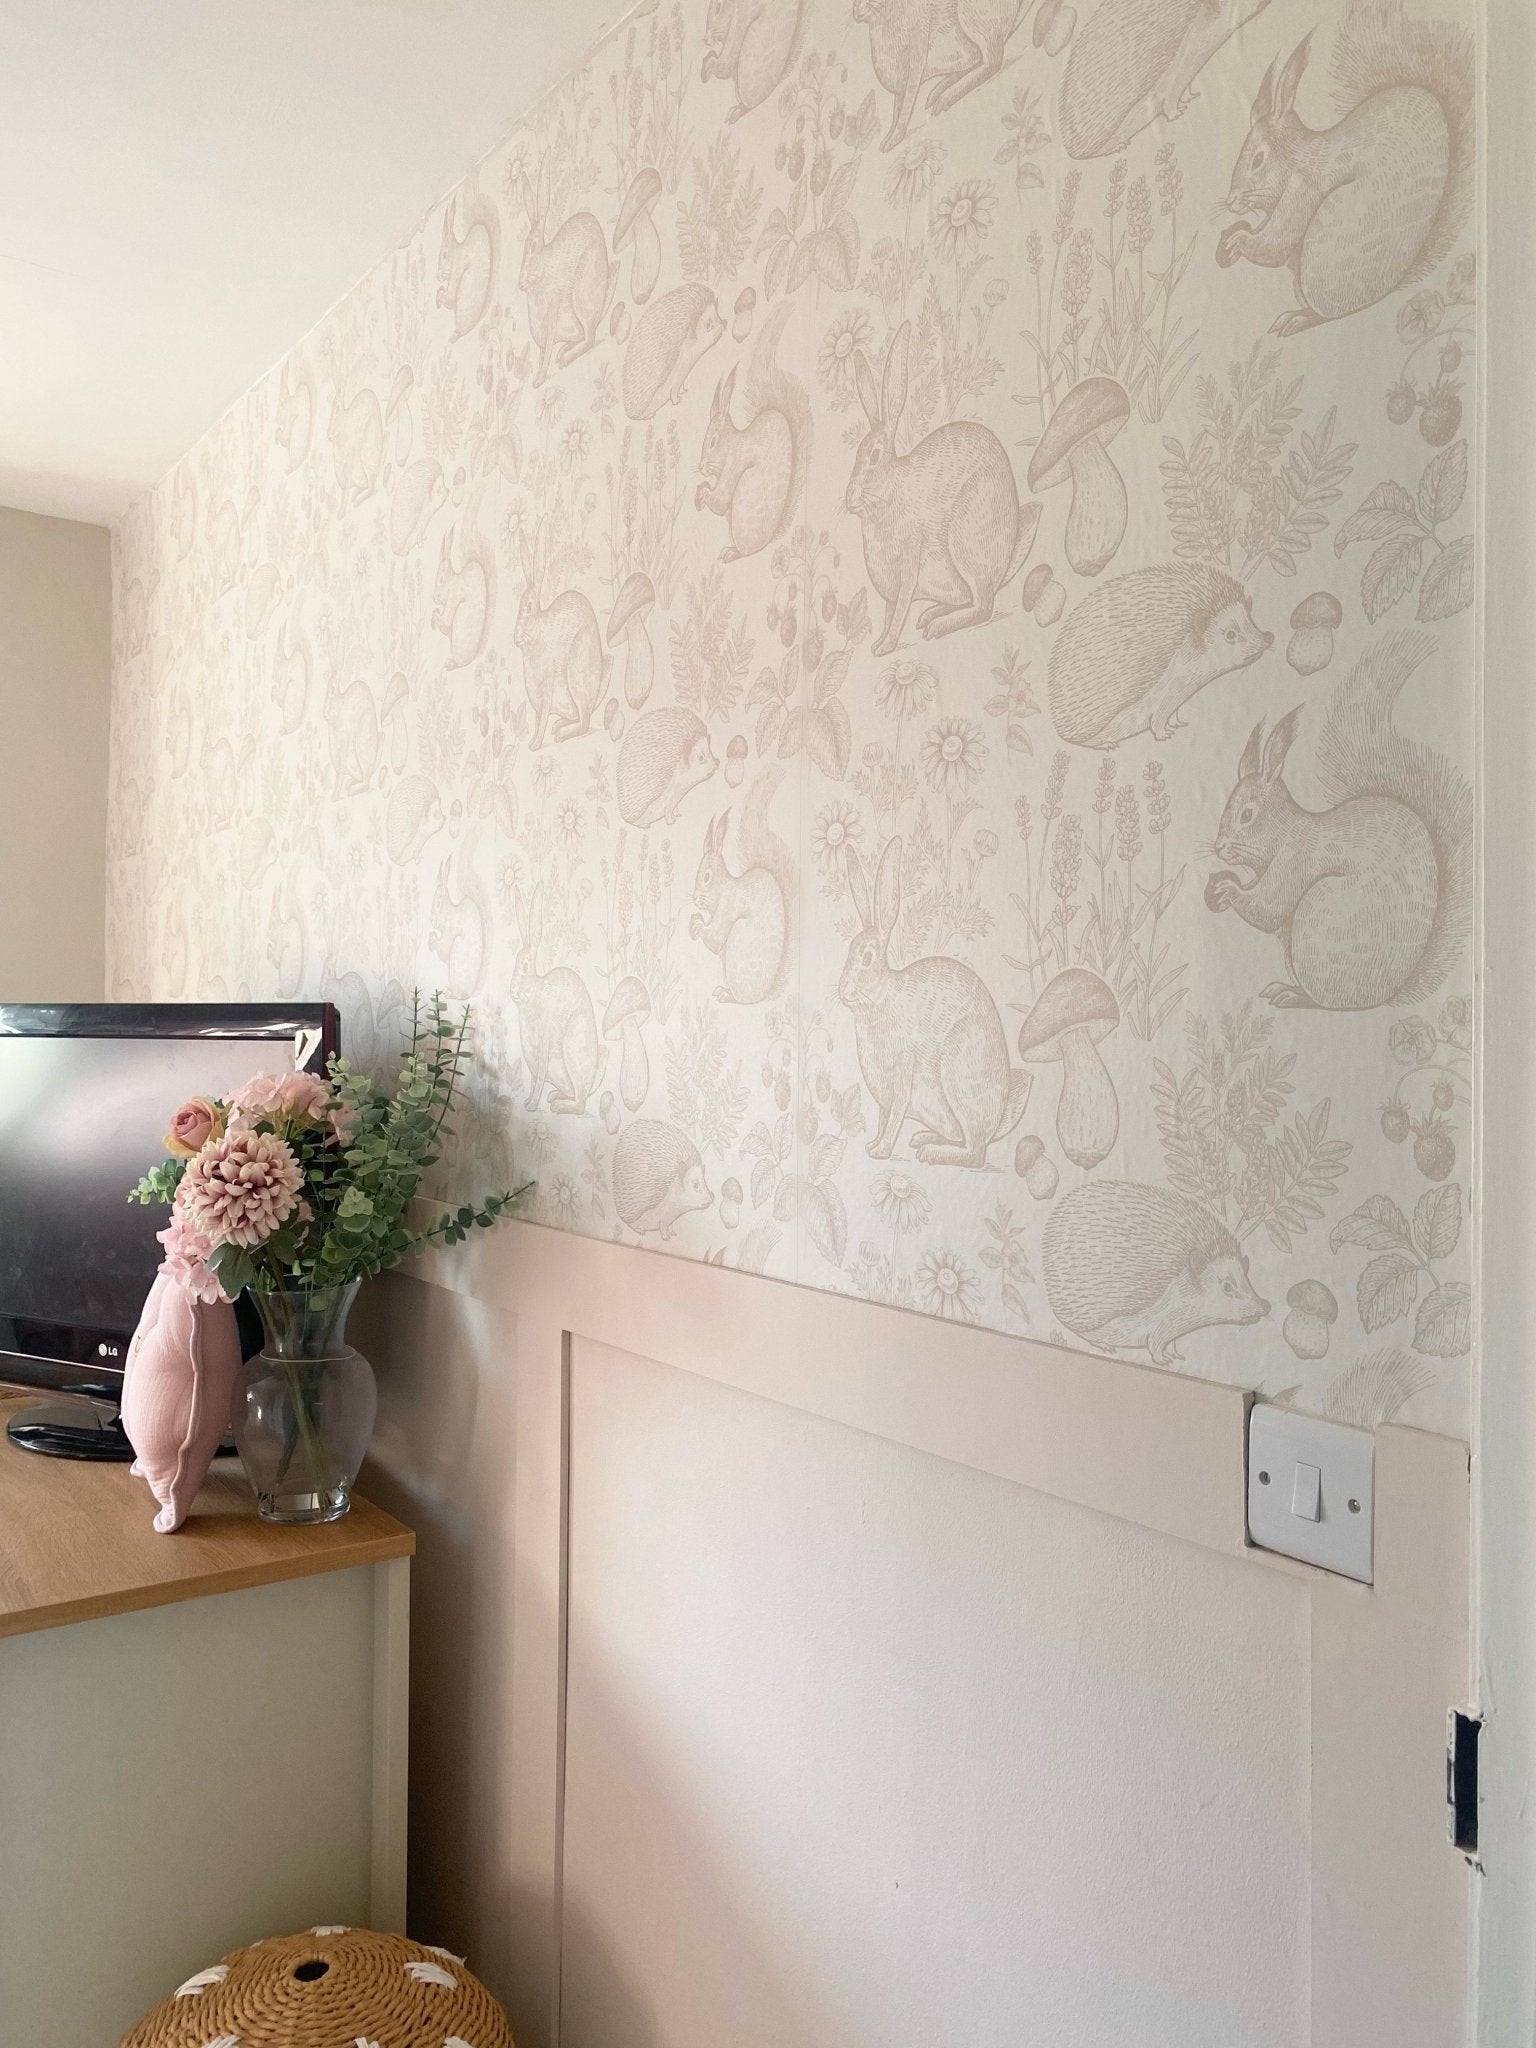 A serene nursery corner featuring wallpaper with a woodland animal theme in beige, showing rabbits, squirrels, and hedgehogs, complemented by a pale pink pig-shaped pillow and fresh flowers.